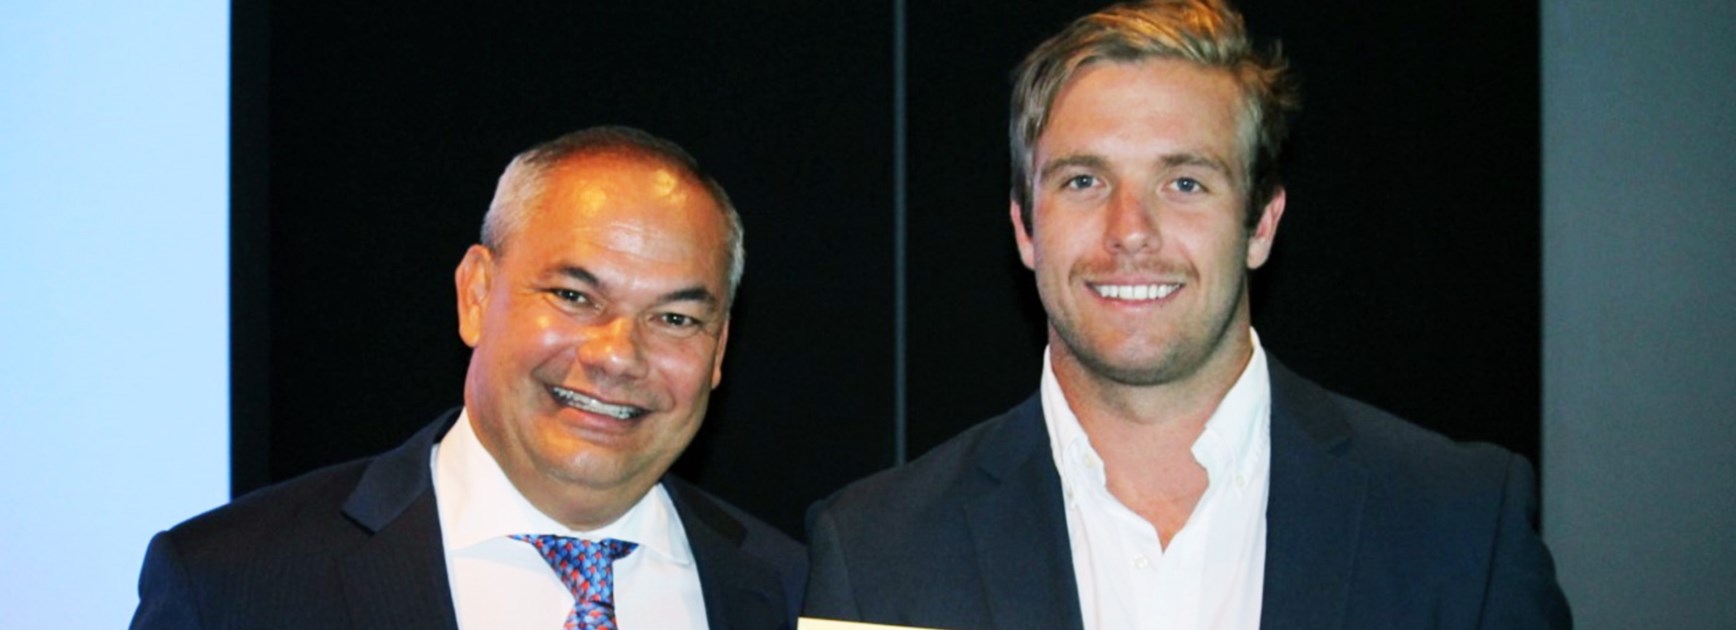 Gold Coast Mayor Tom Tate presents Kane Elgey with his award as the city's Young Citizen of the Year for 2016.